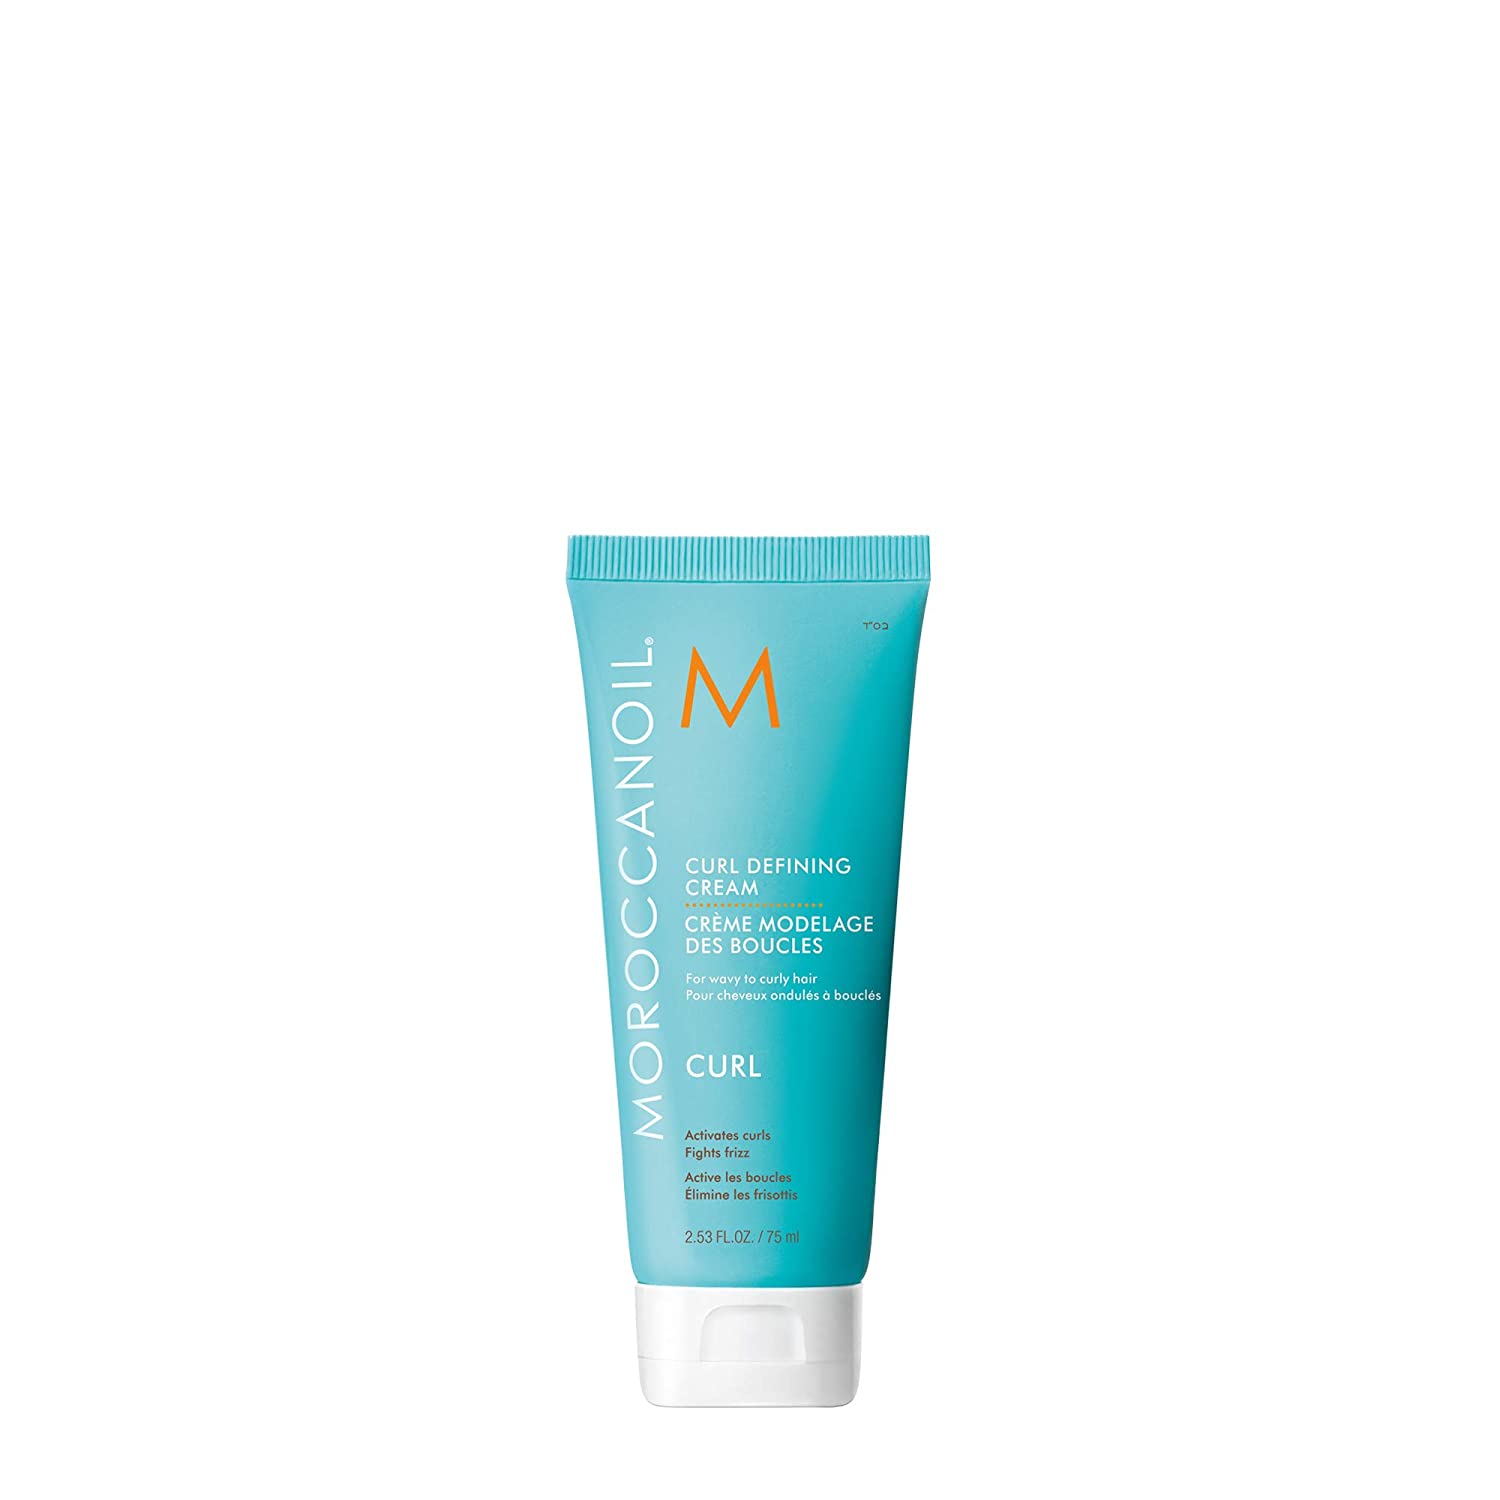 Moroccanoil Curl Defining Cream Sulfate-Free Curly Hair Product